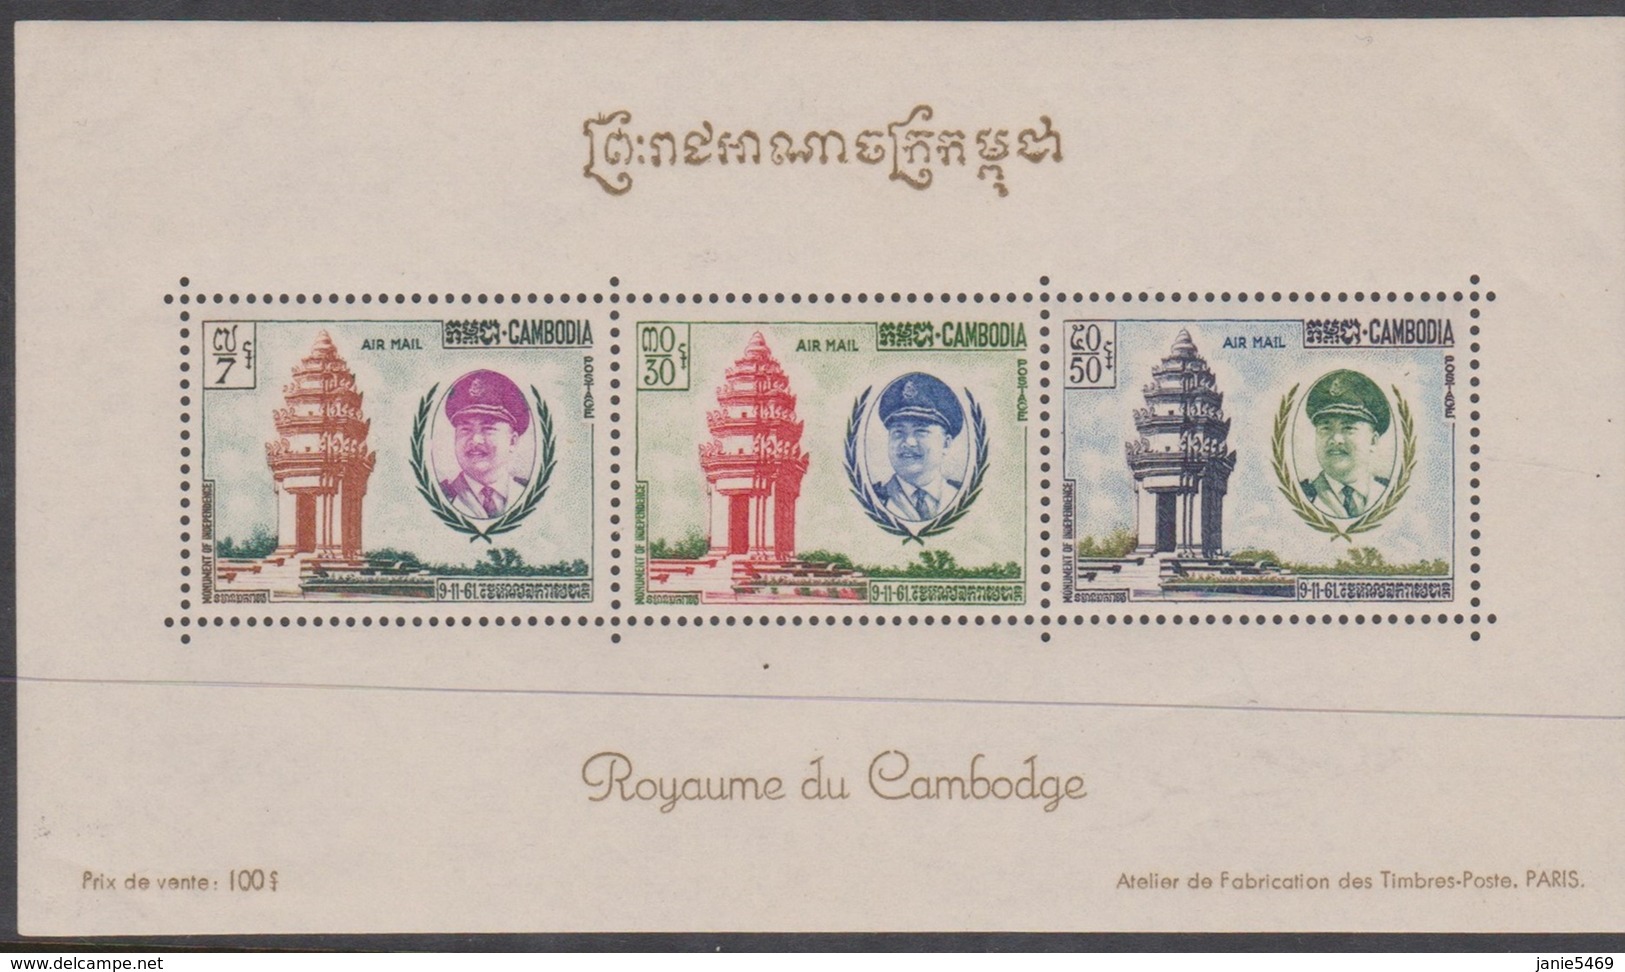 Cambodia Scott C15-C17 1961 10th Anniversary Of Independence Souvenir Sheet, Mint Never Hinged - Cambodia